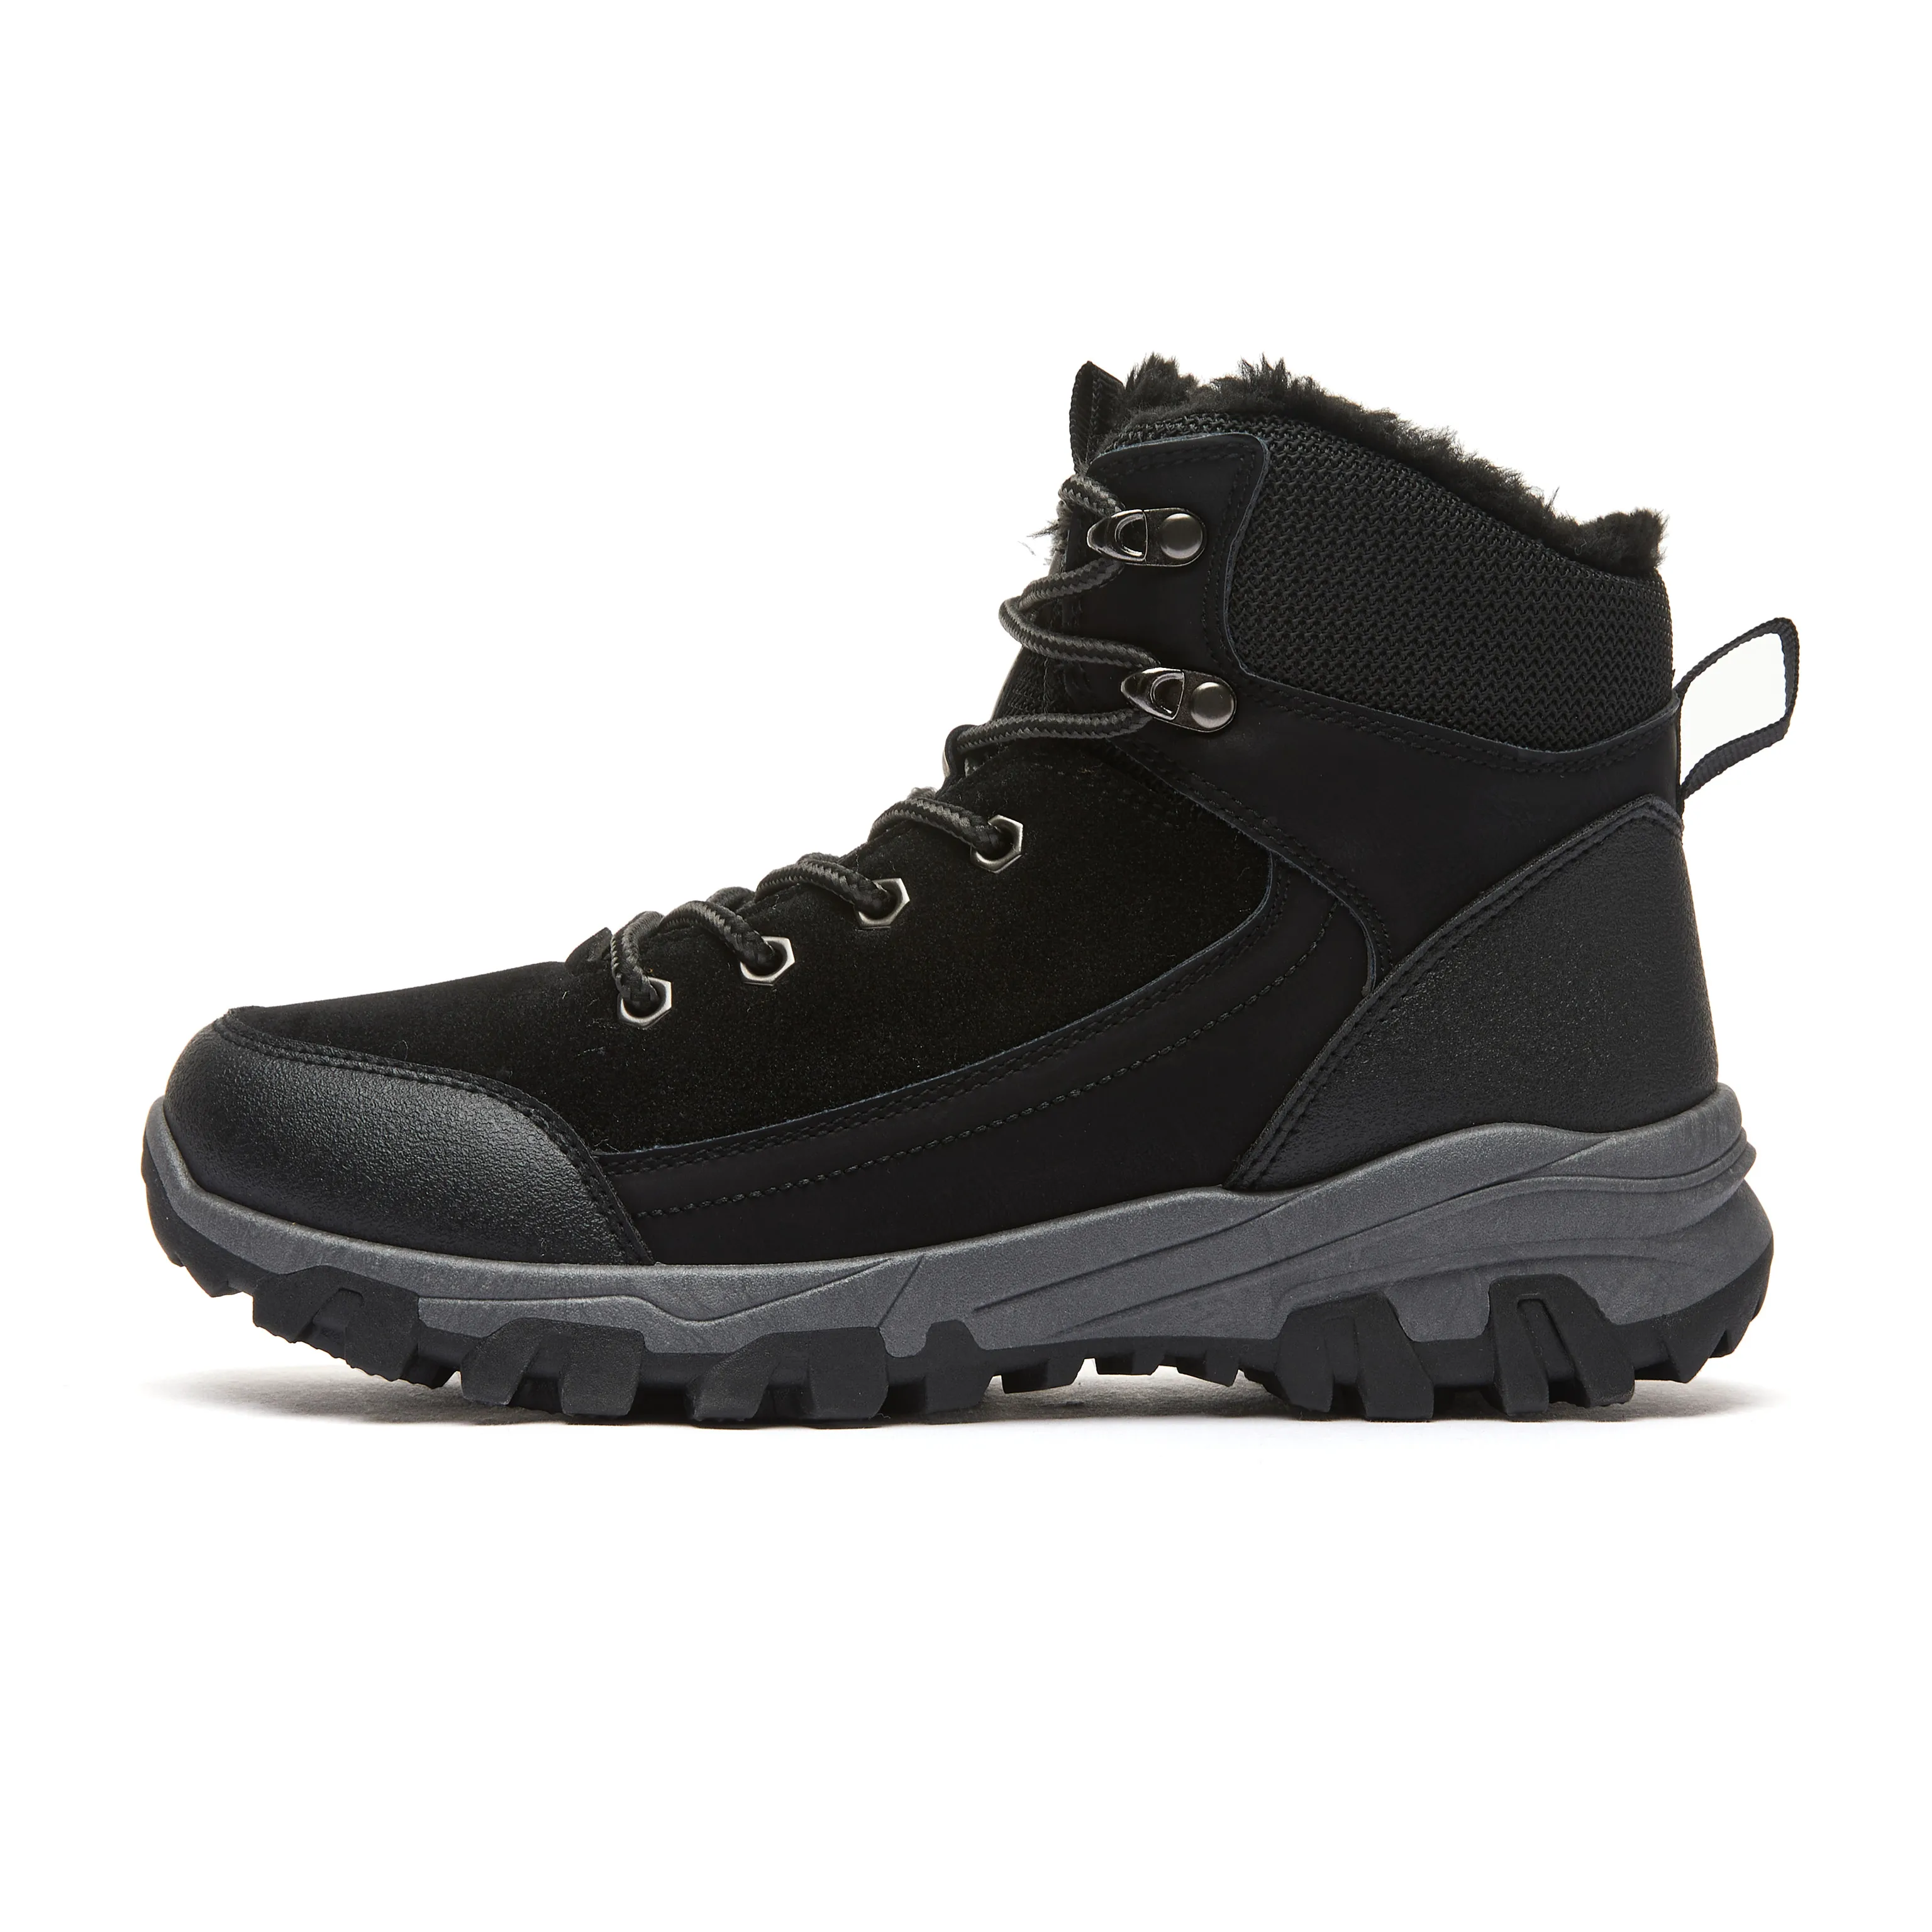 Customized hot selling high-quality fashion waterproof outdoor men's snow hiking boots